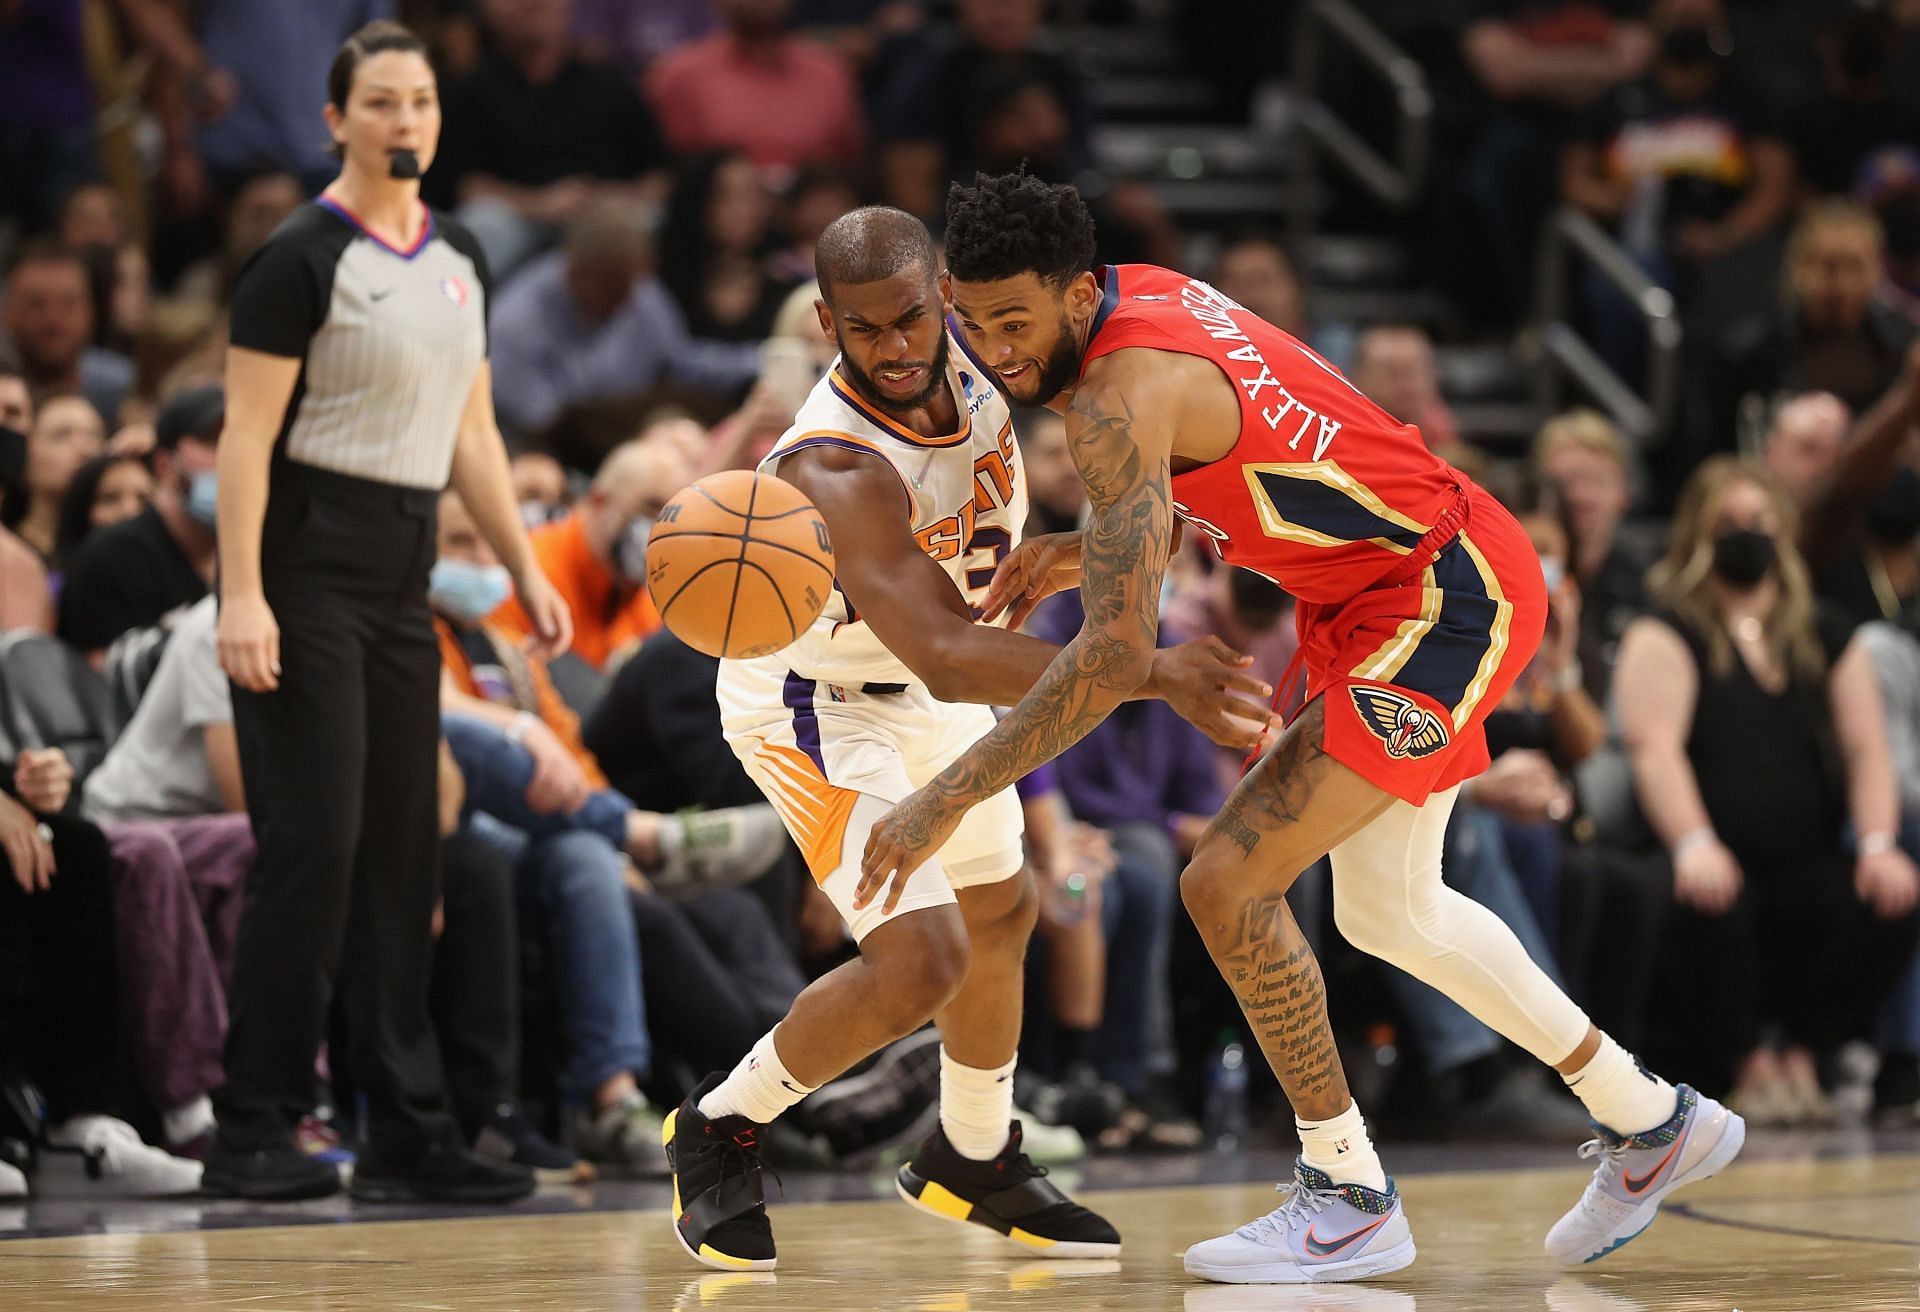 The New Orleans Pelicans will host the Phoenix Suns on January 4th